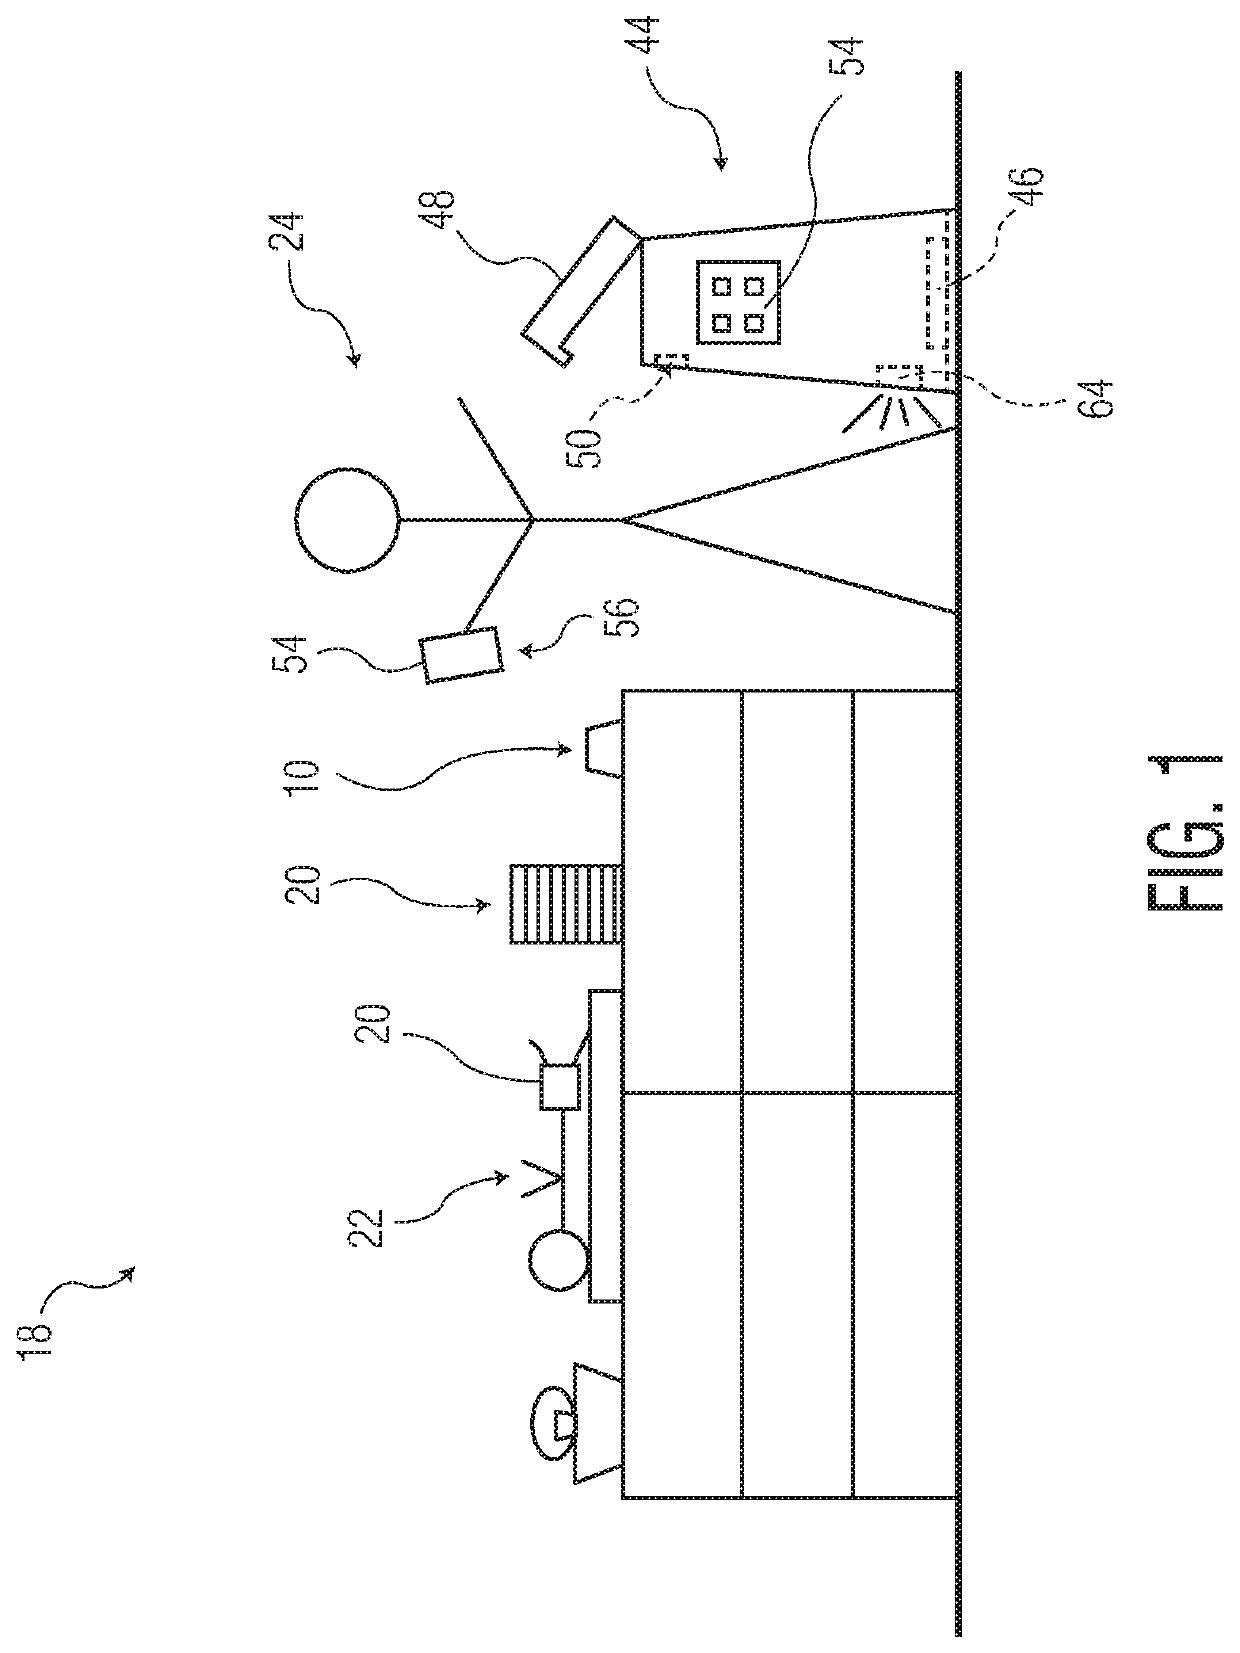 System for documenting product usage by recognizing an acoustic signature of a product